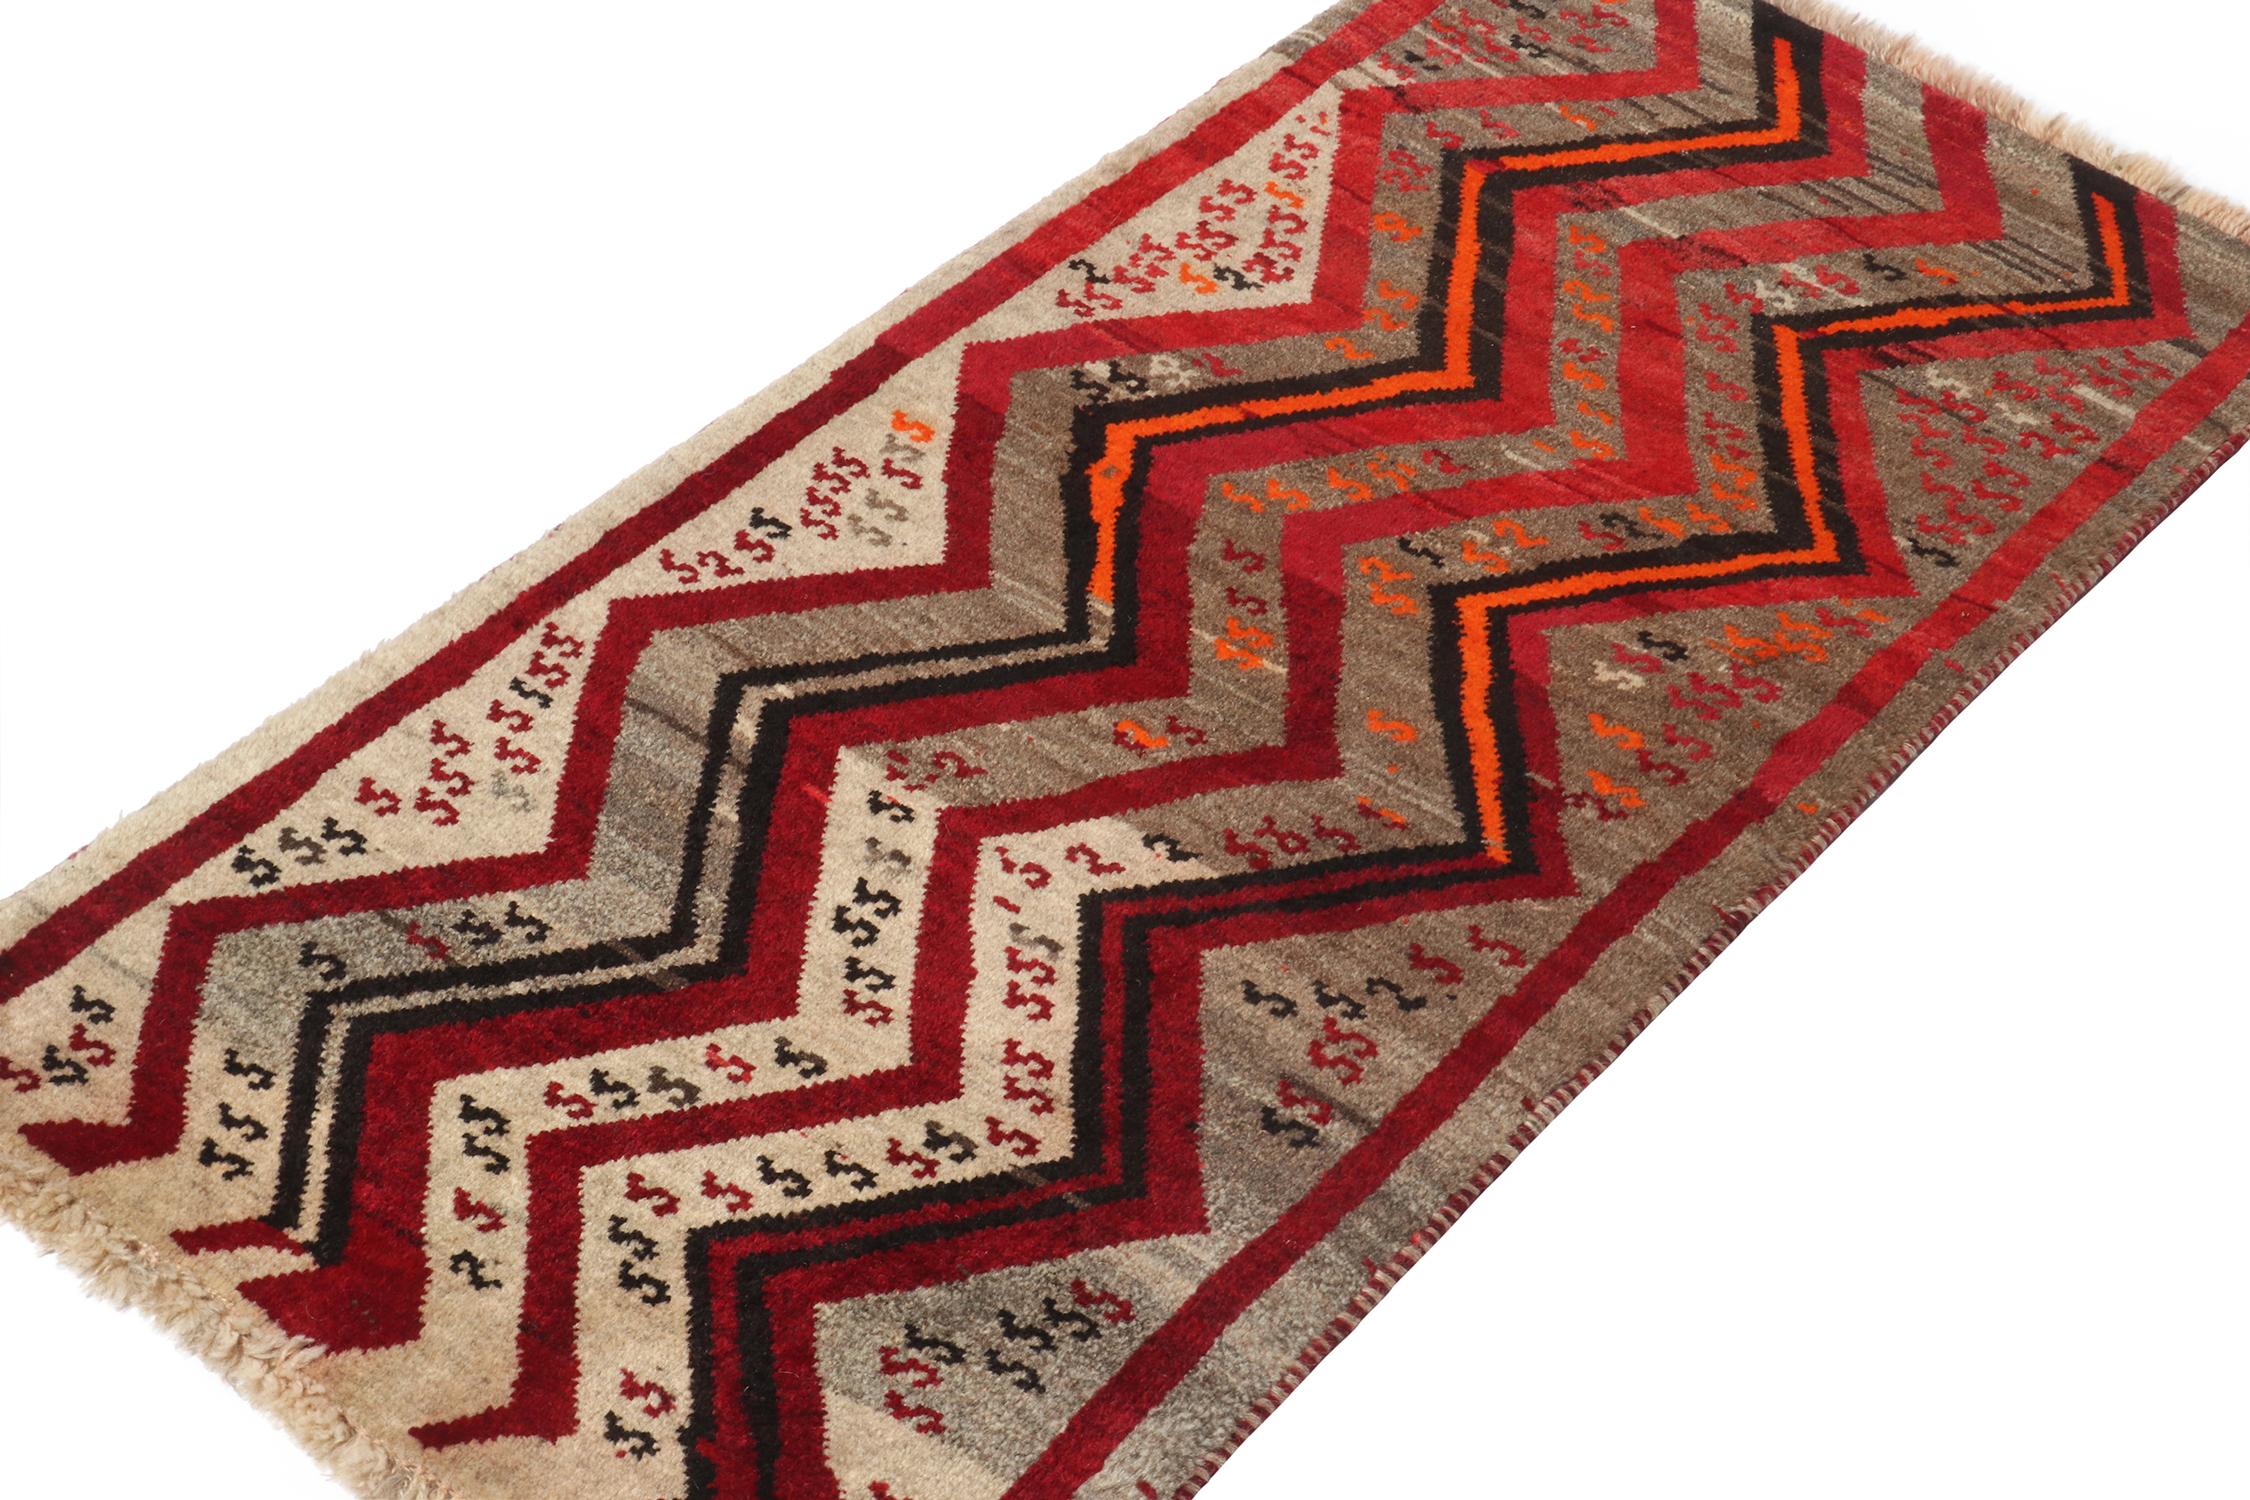 A vintage 2x4 Persian Gabbeh rug, from a grand entry to Rug & Kilim’s curation of rare tribal pieces. Hand-knotted in wool circa 1950-1960. 

On the Design: 

This mid-century piece features chevrons and motifs in bold red, orange and black atop